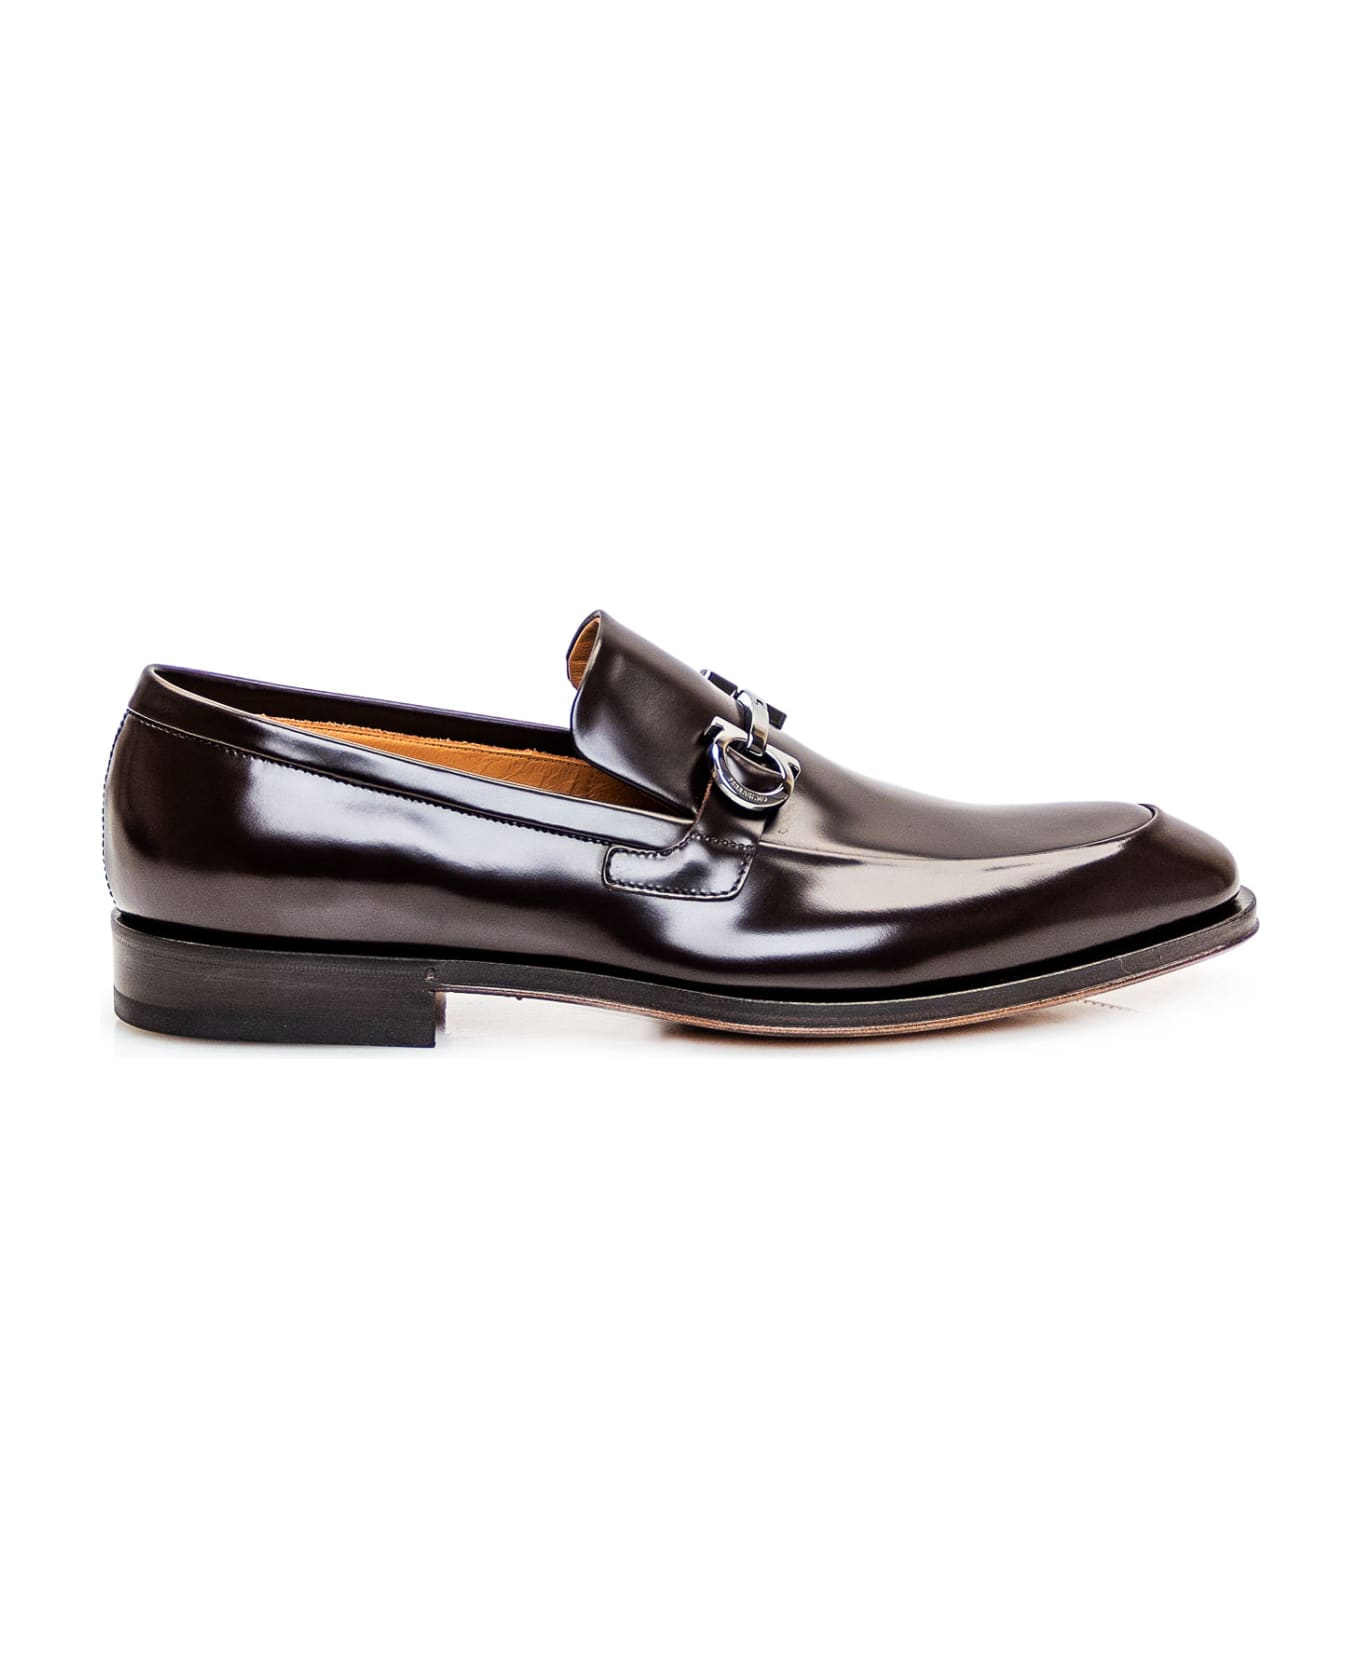 Ferragamo Loafer With Hook Ornament - HICKORY